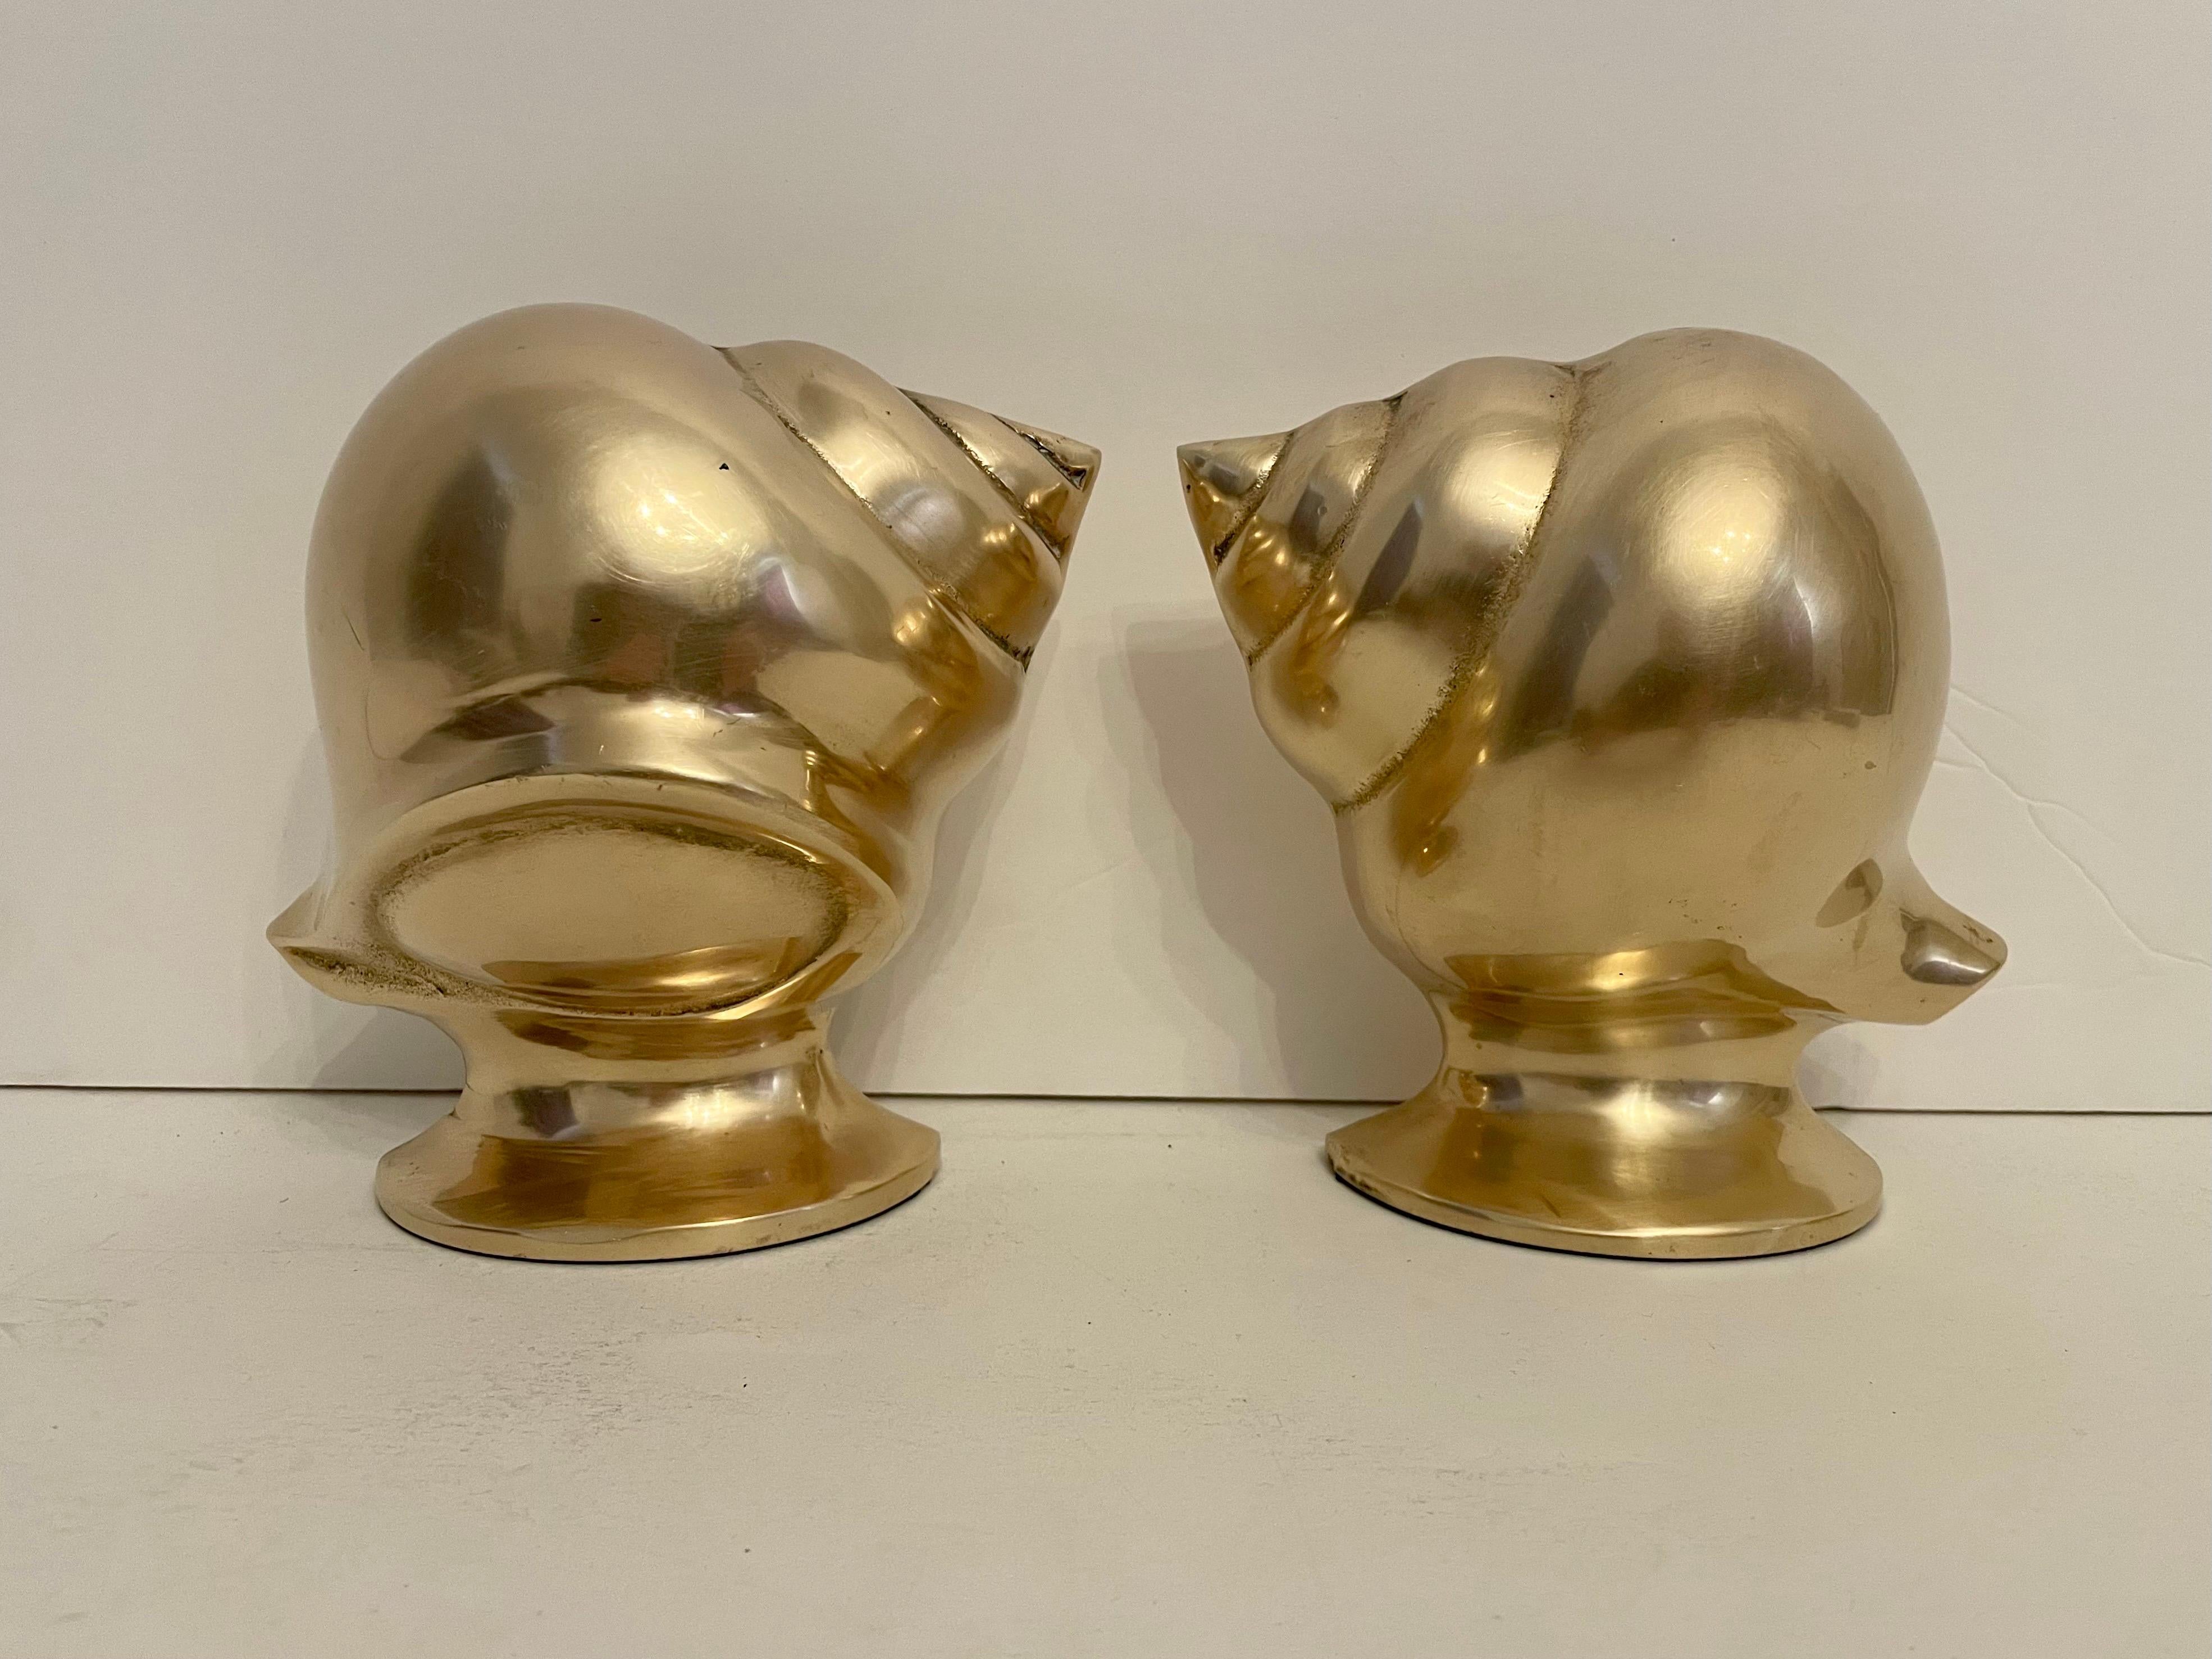 Brass nautical conch shell bookends. Nice detail in casting, heavy weight with substantial feel. Holds a shelves worth of books. Good condition, some slight patina. Thin pad on bottom to protect surfaces. Any dark or light spots are reflection only.